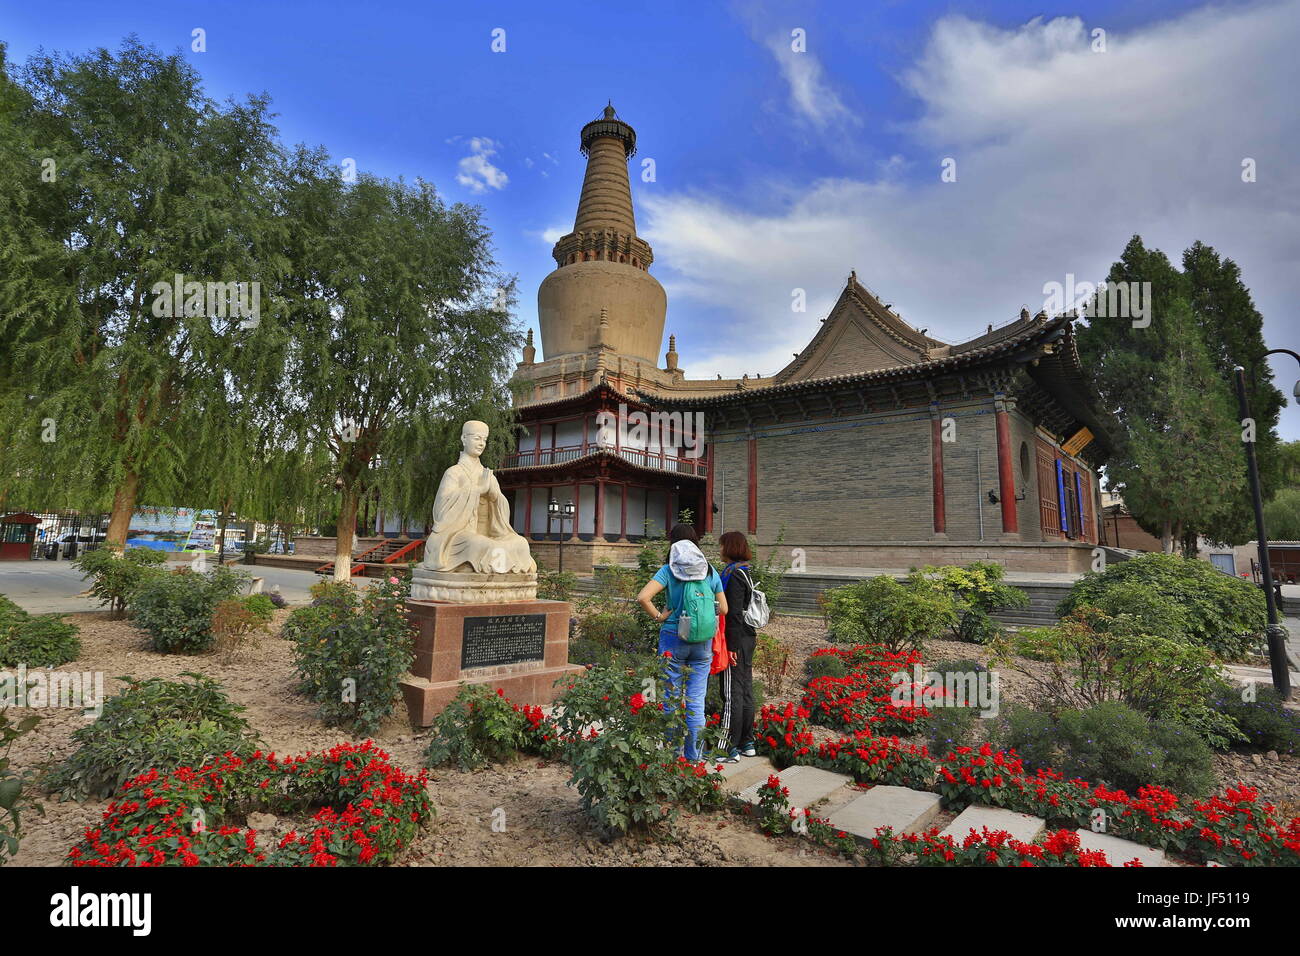 Zhangye, Zhangye, China. 29th June, 2017. Zhangye, CHINA-Sep 8 (EDITORIAL USE ONLY. CHINA OUT) The?Dafo Temple, also known as Great Buddha Temple or Grand Buddha Monastery, is an ancient Buddhist temple in?Zhangye,?northwest's China Gansu, notable for its gigantic?reclining Buddha?statue of around A.D. 1,100, which is thirty-five metres long. It has had several names over the centuries, including the?Kasyapa Buddha Temple, the?Bojue Temple, the?Hongren Temple, and the?Reclining Buddha Temple. The present name of ''Dafo'' means ''Great Buddha' Credit: SIPA Asia/ZUMA Wire/Alamy Live News Stock Photo